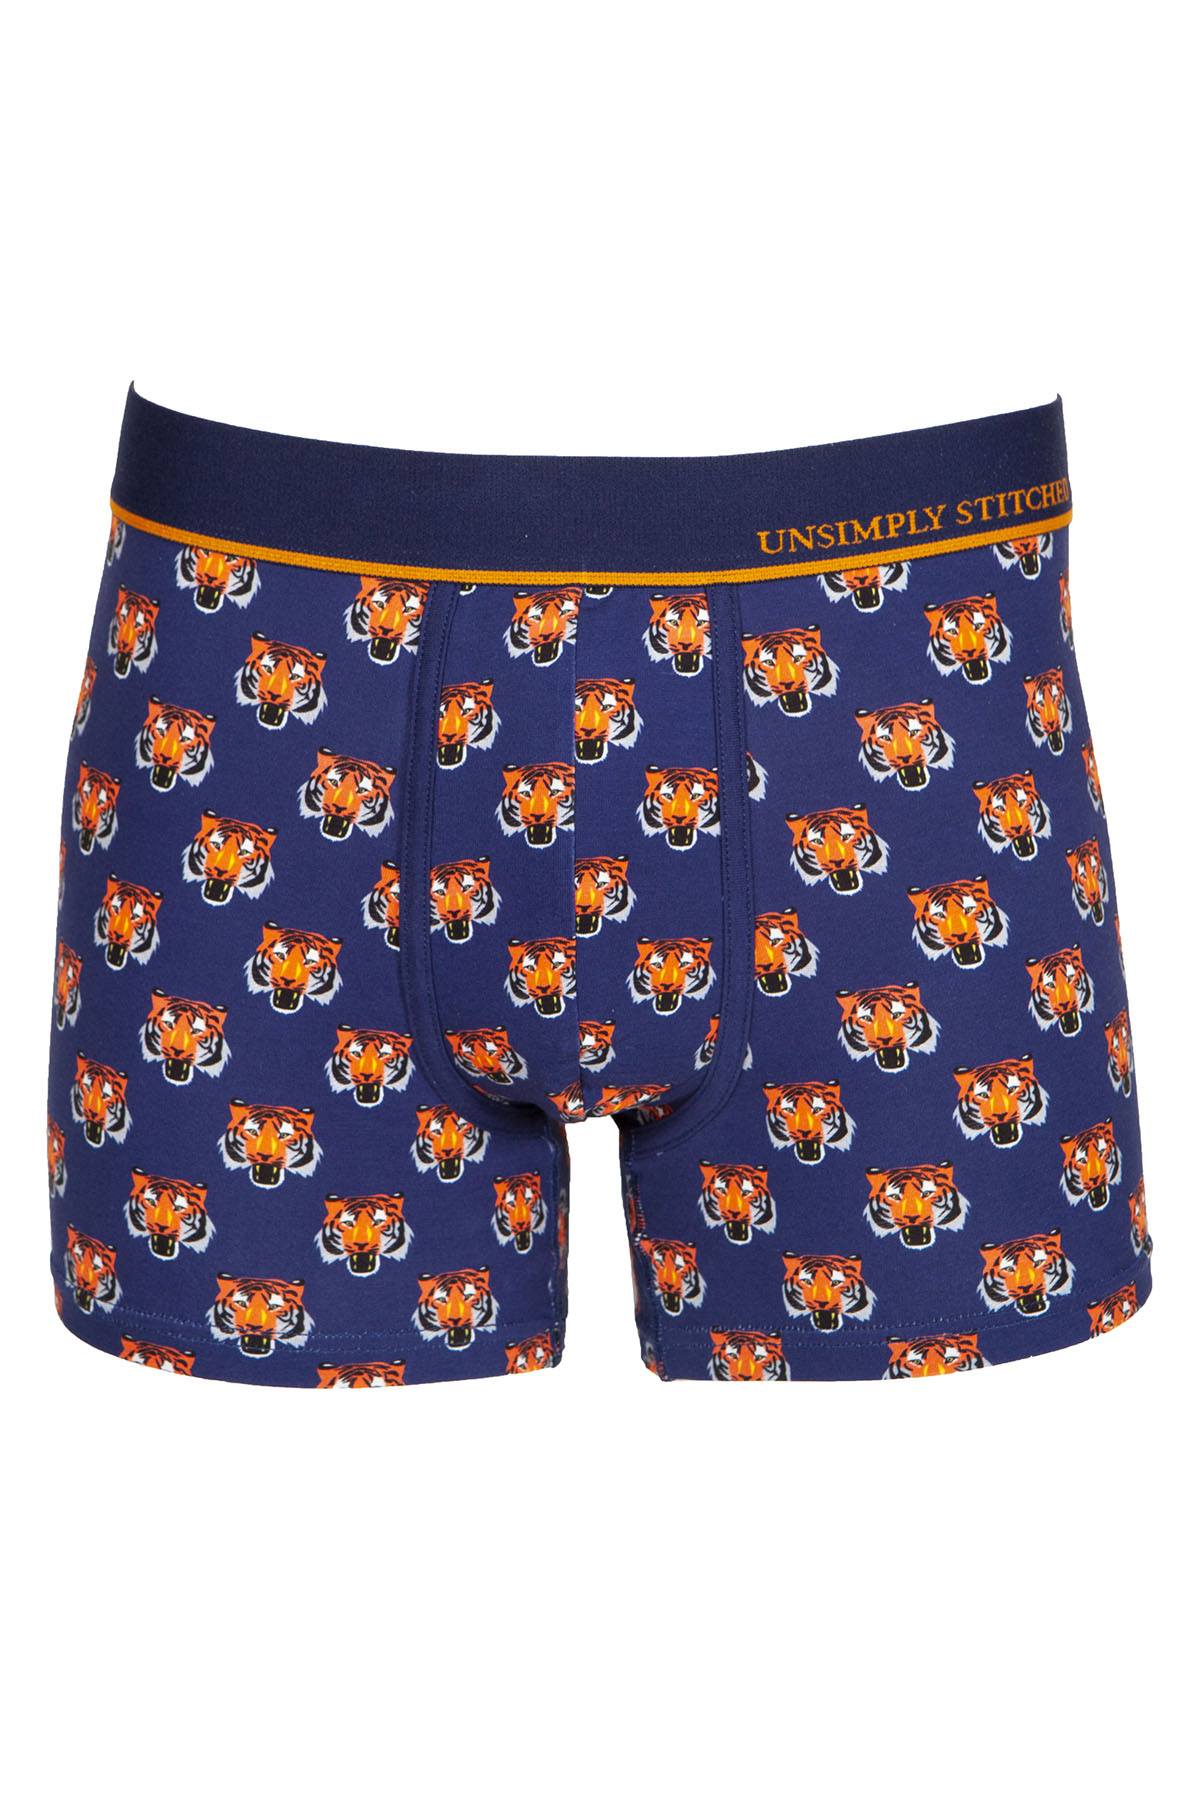 Unsimply Stitched Navy Tiger Trunk